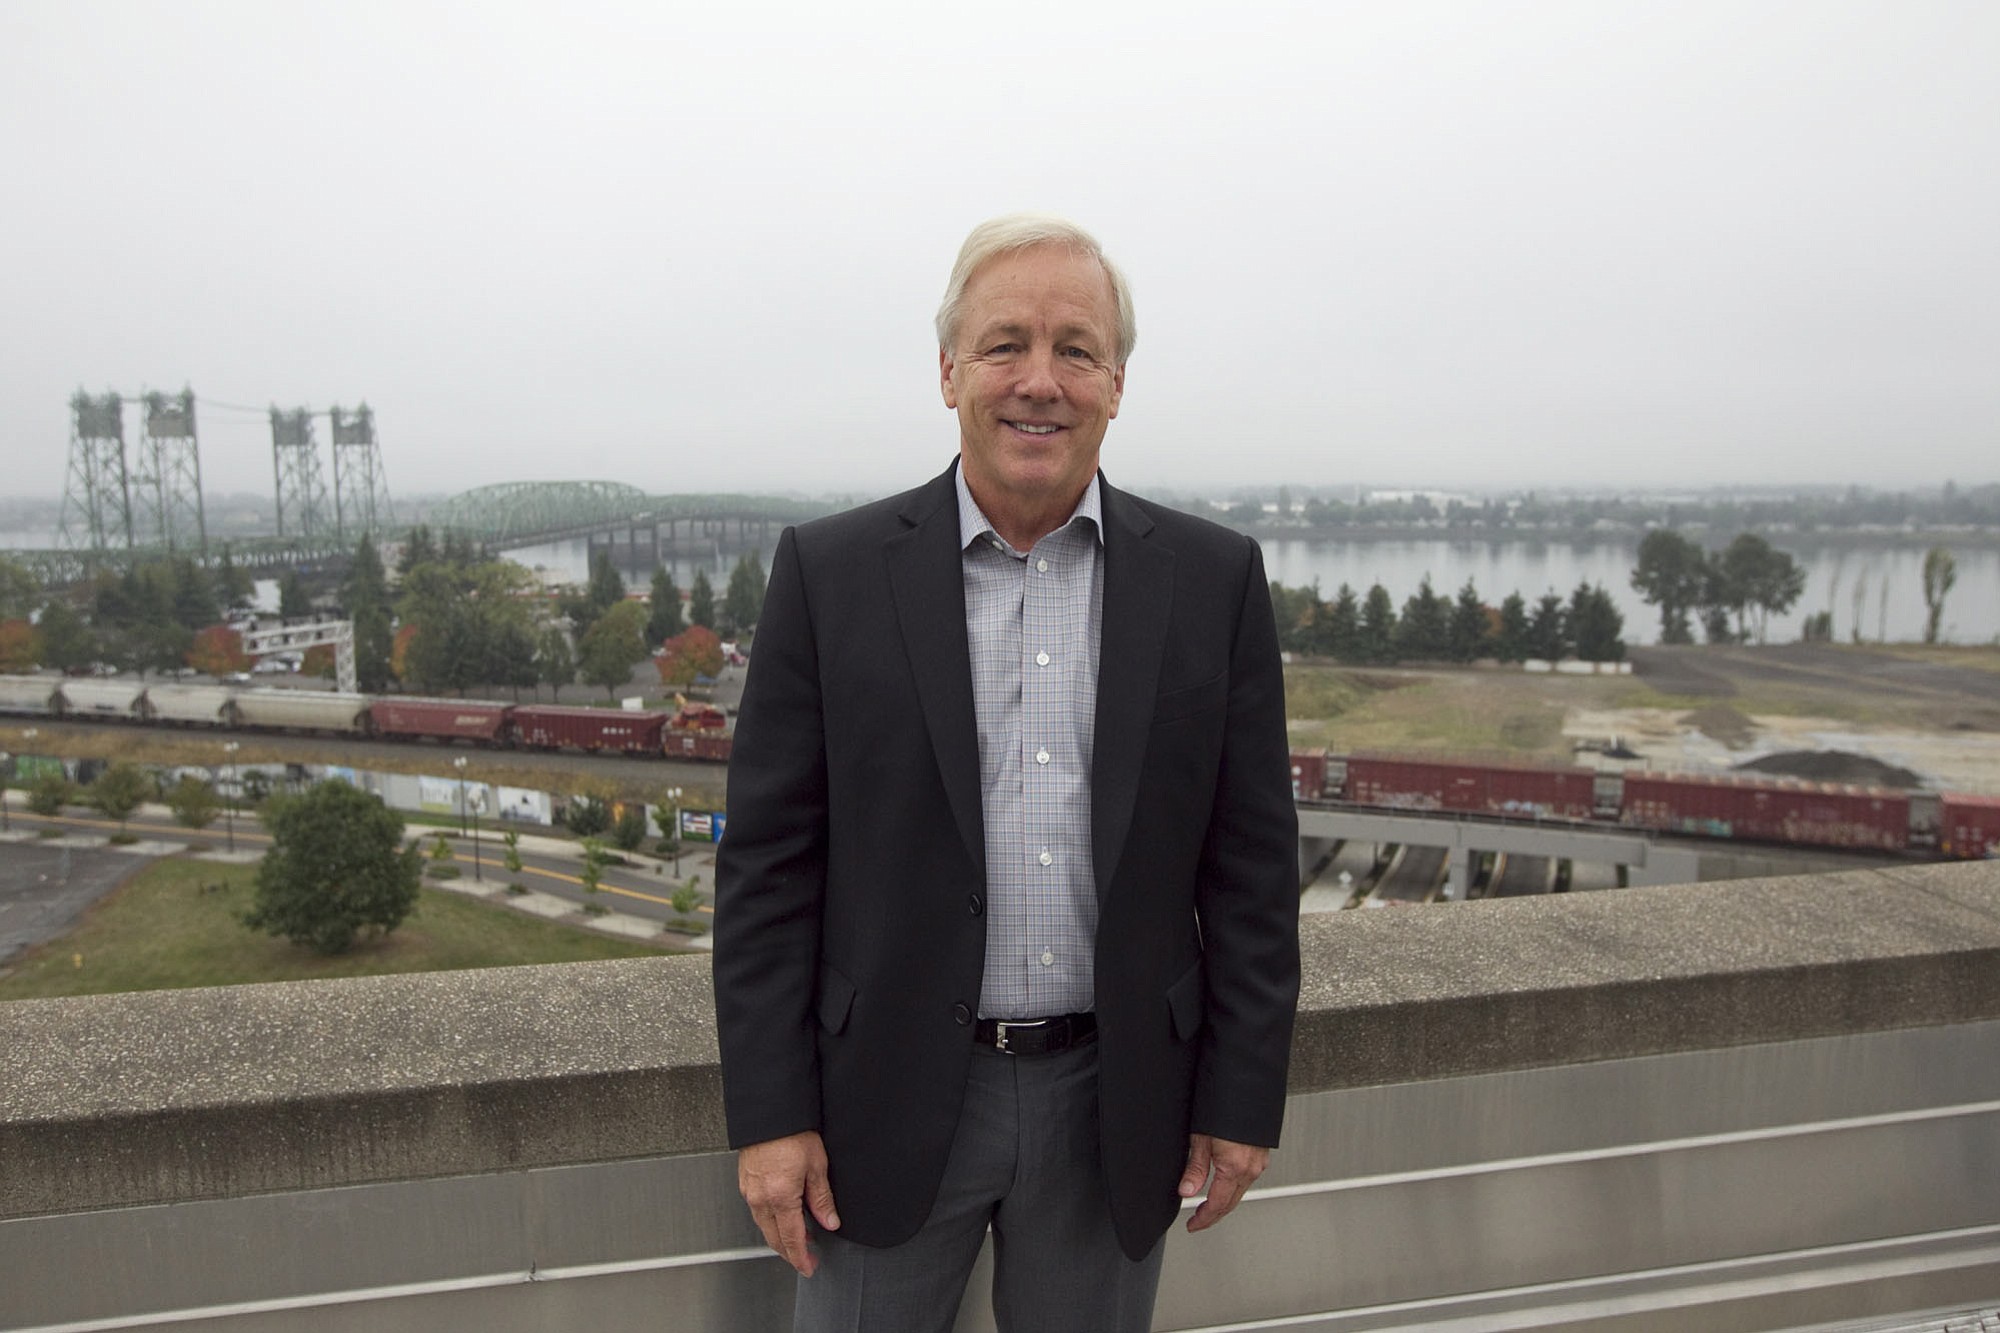 Barry Cain of Gramor Development poses for a photo on roof of city hall in Vancouver Thursday October 9, 2014. The area in the background will be the site of a $1.3 billion commercial/residential redevelopment of the city?s waterfront.